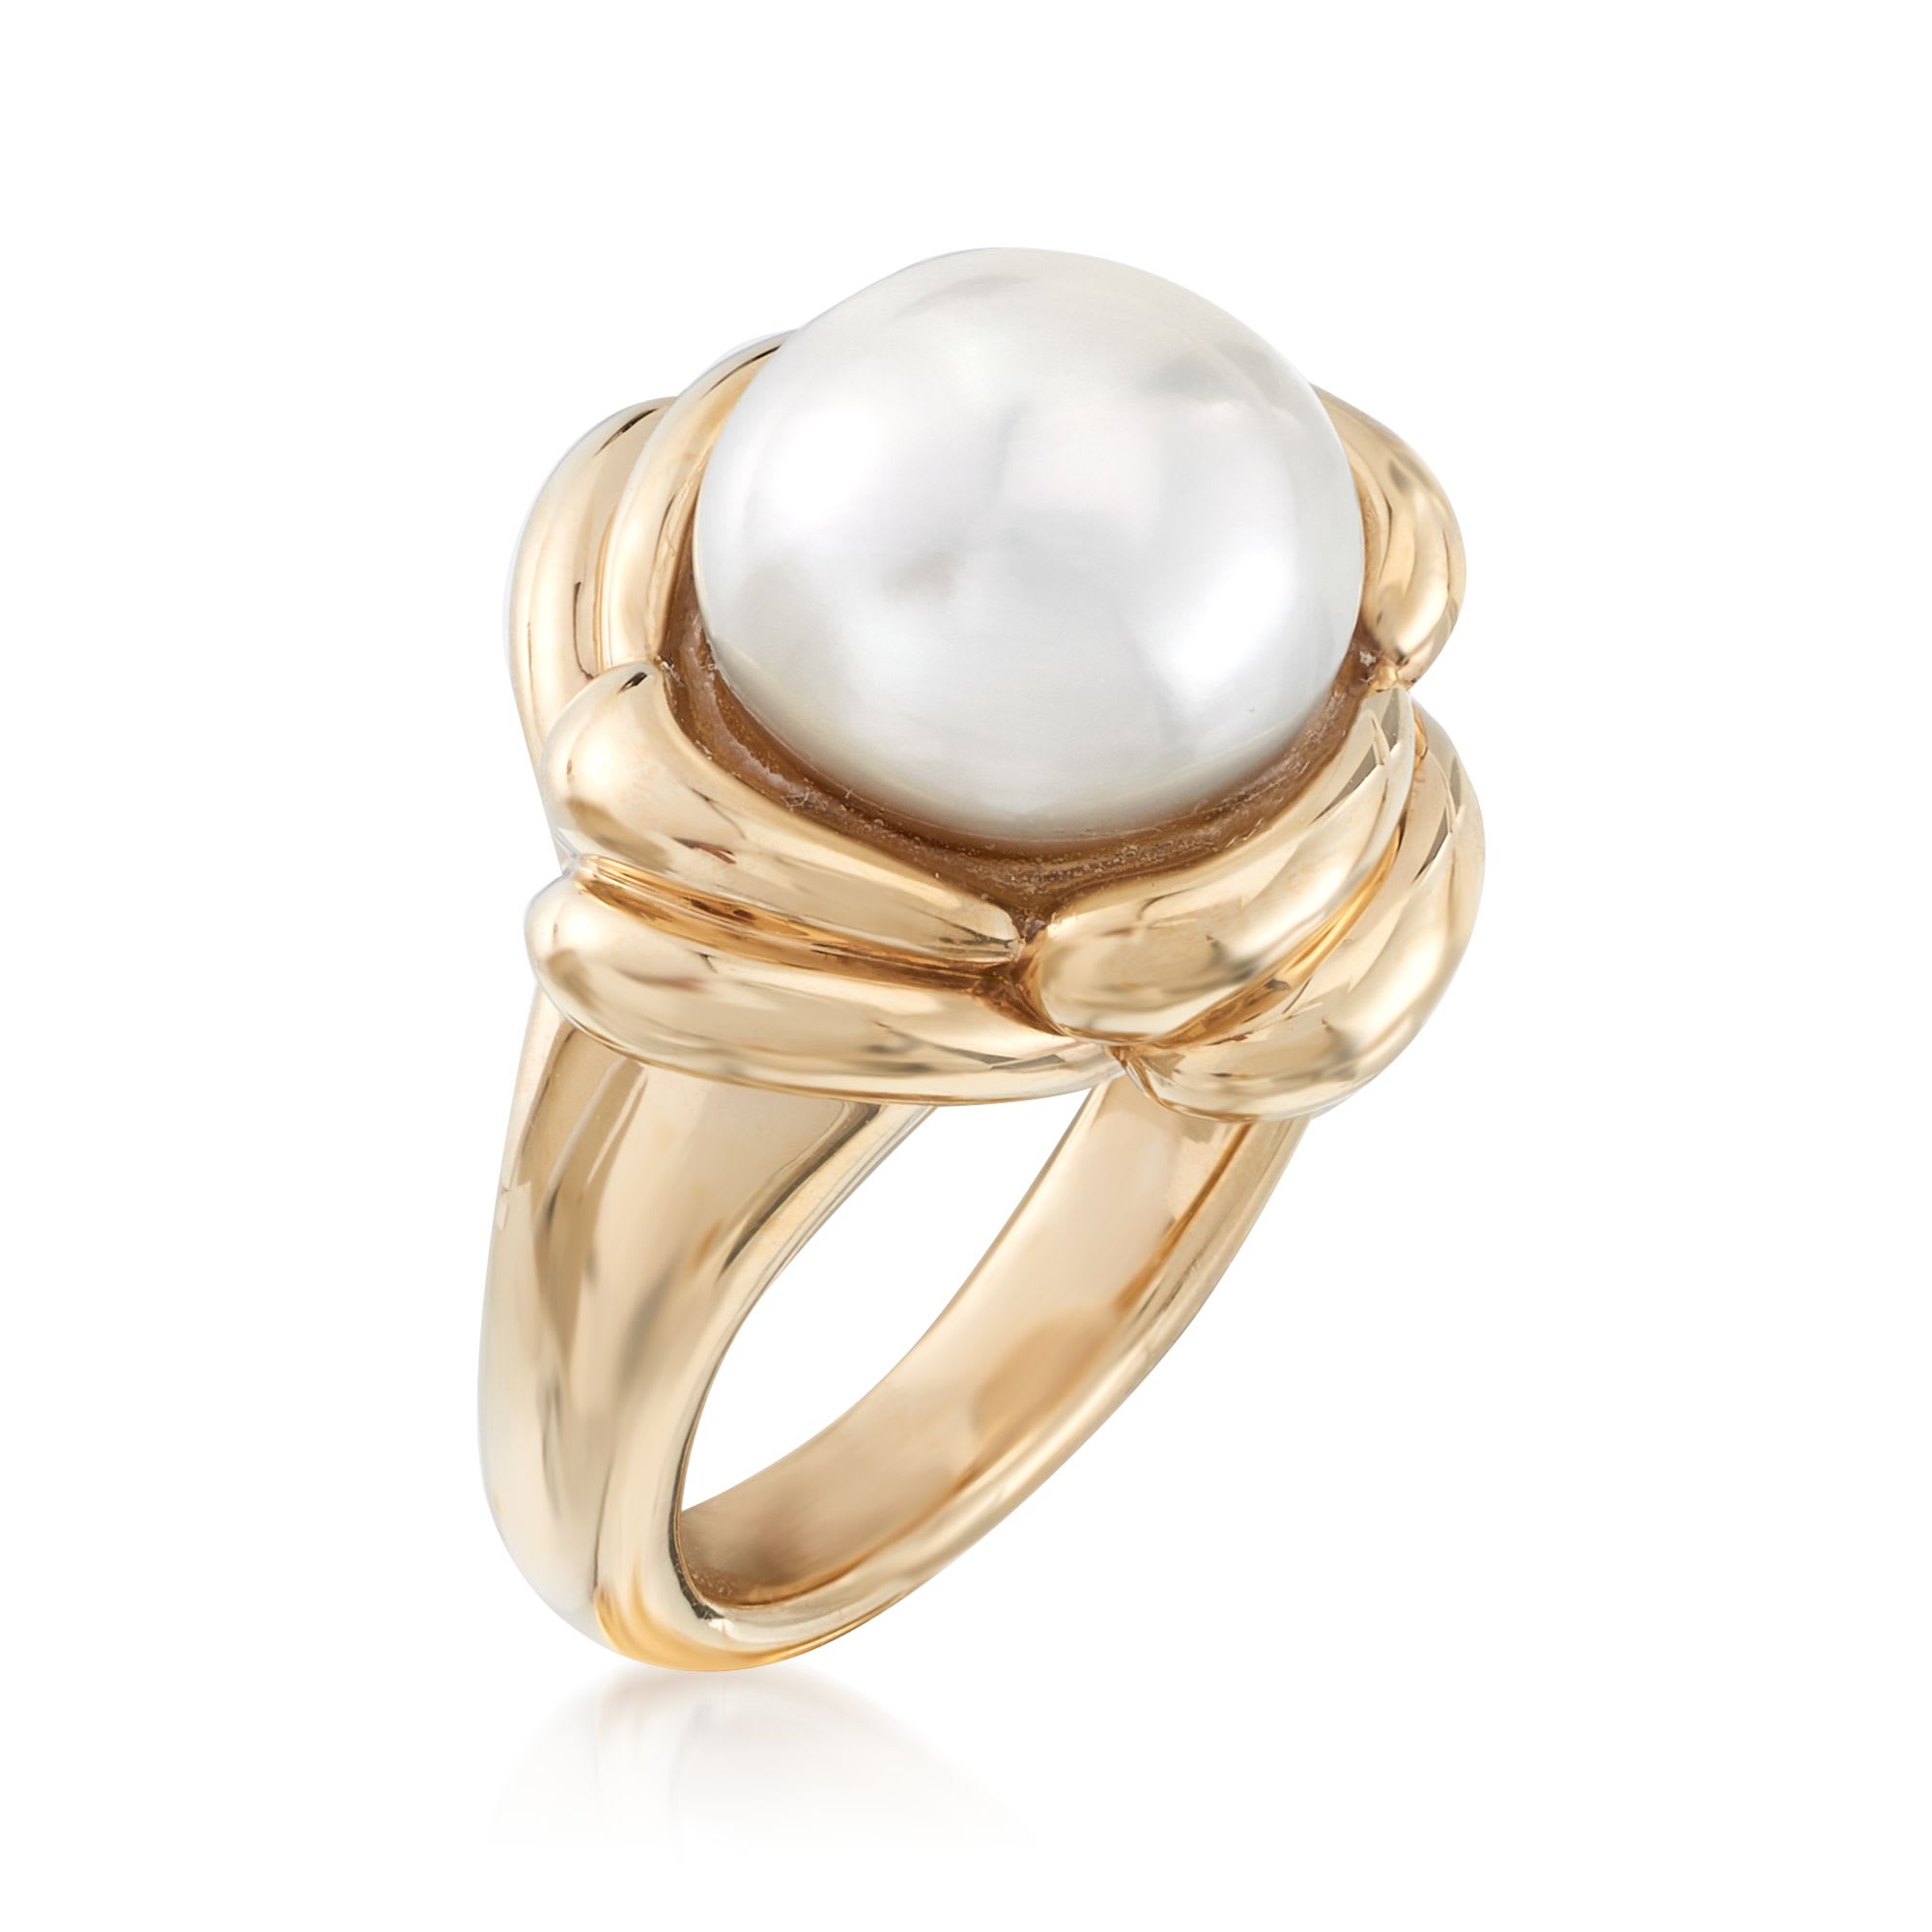 11.5-12mm Cultured Pearl Scalloped Ring in 14kt Yellow Gold | Ross-Simons